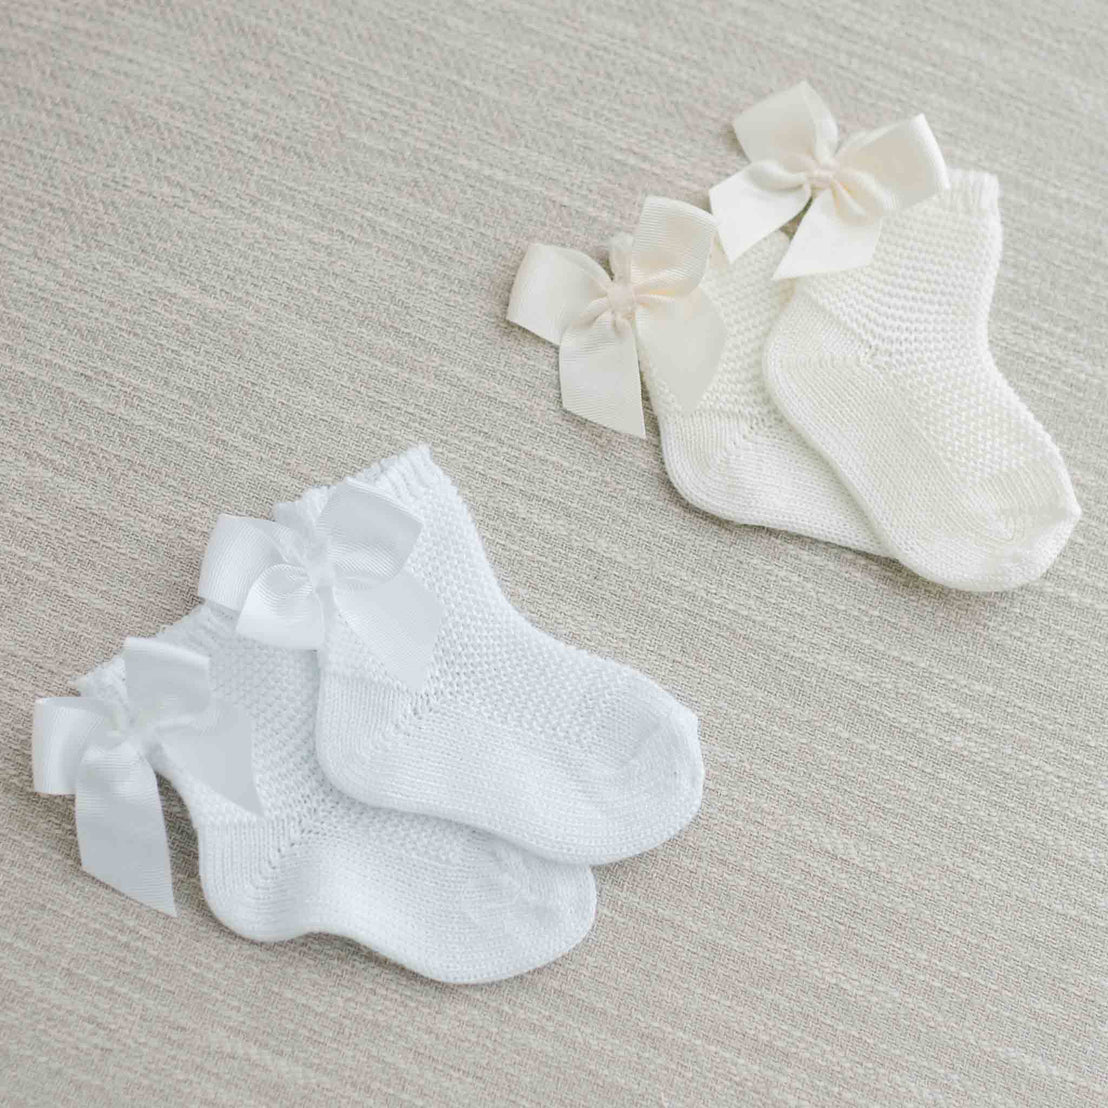 Two pairs of Garter Stitch Socks with Bow, presented on a soft beige fabric background.